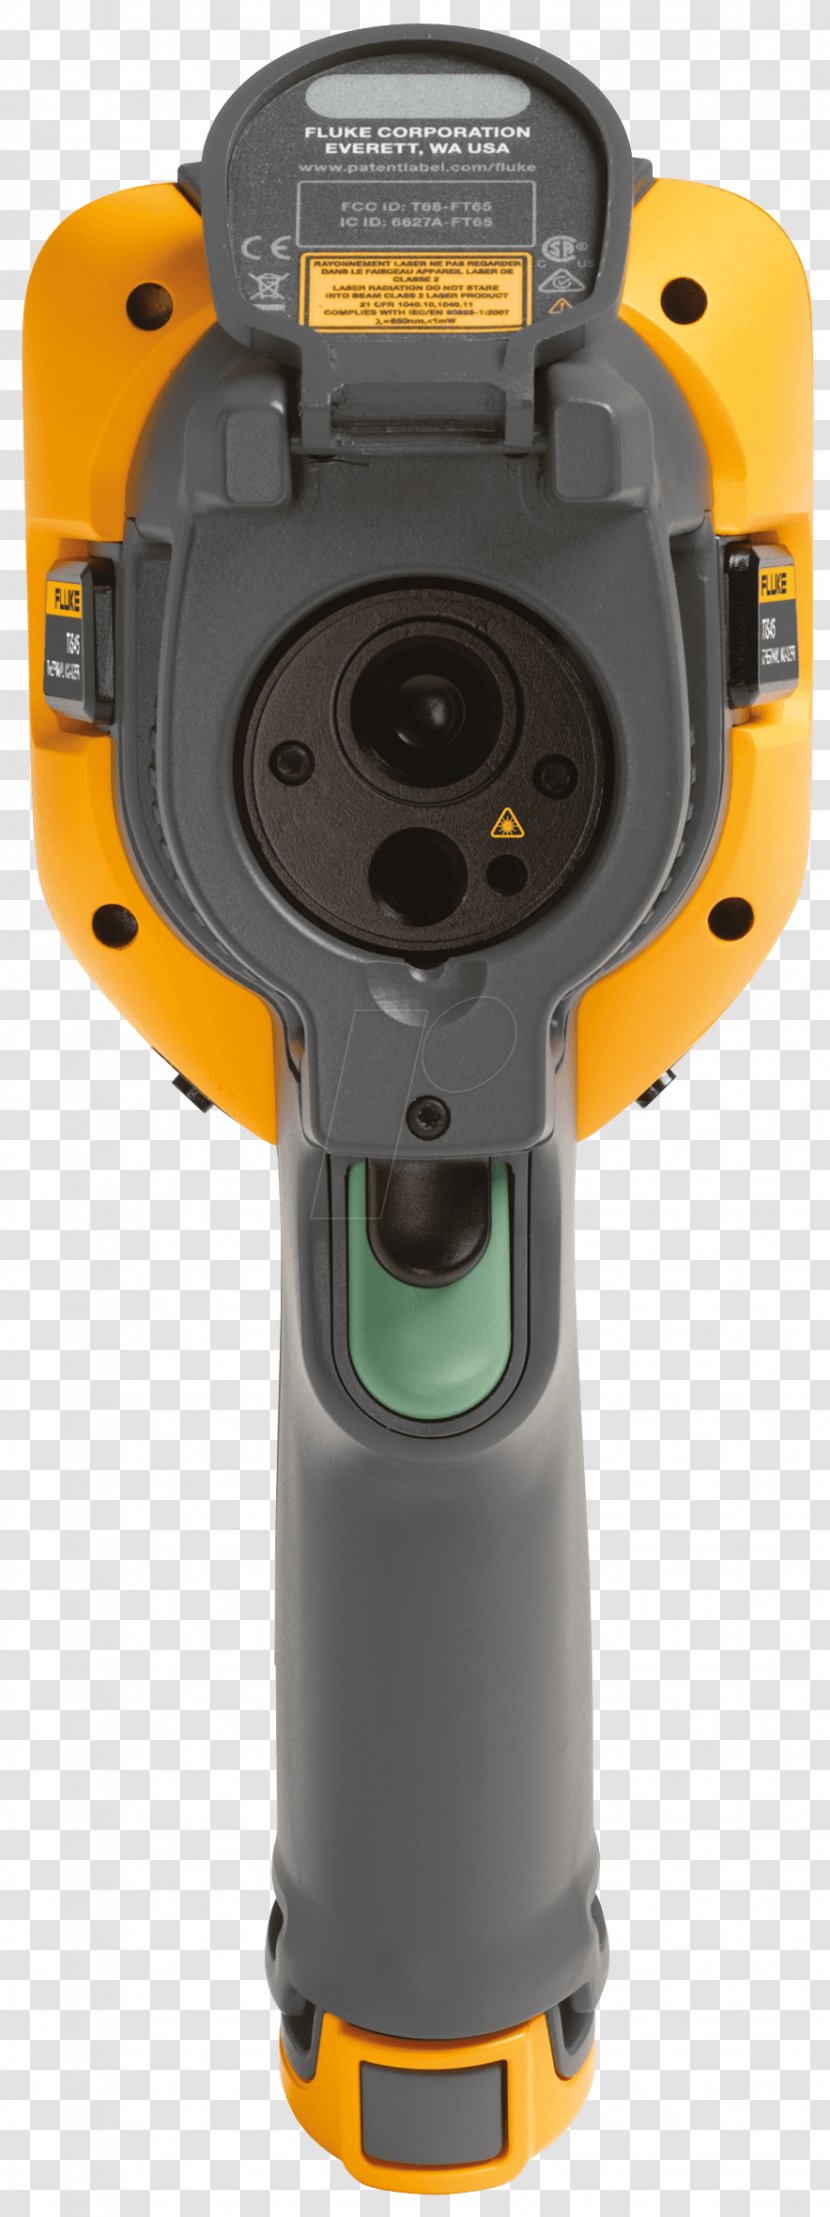 Thermographic Camera Thermal Imaging Fluke Corporation Thermography - Manual Focus Transparent PNG